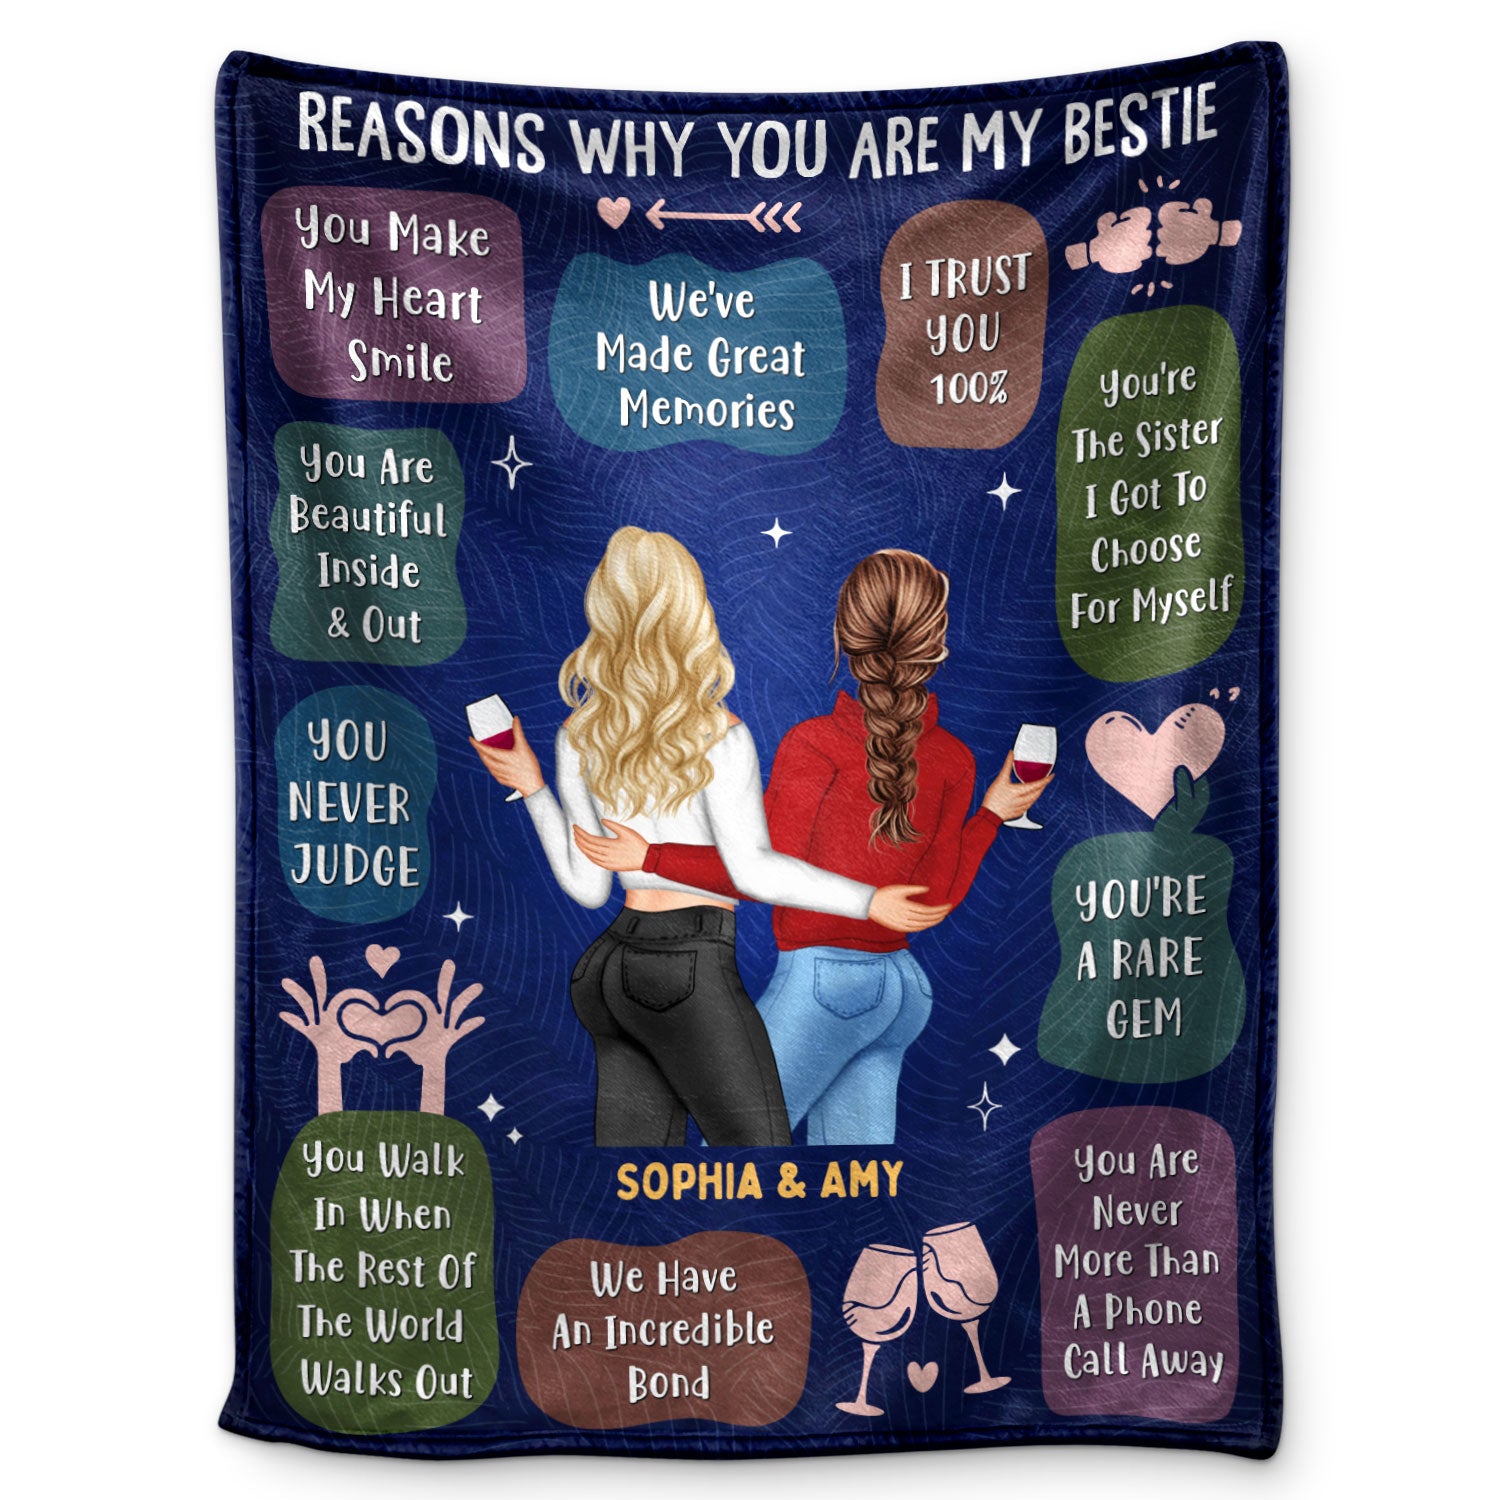 Reasons Why You Are My Bestie - Holiday, Birthday, Loving Gift For Friends, Colleagues - Personalized Fleece Blanket